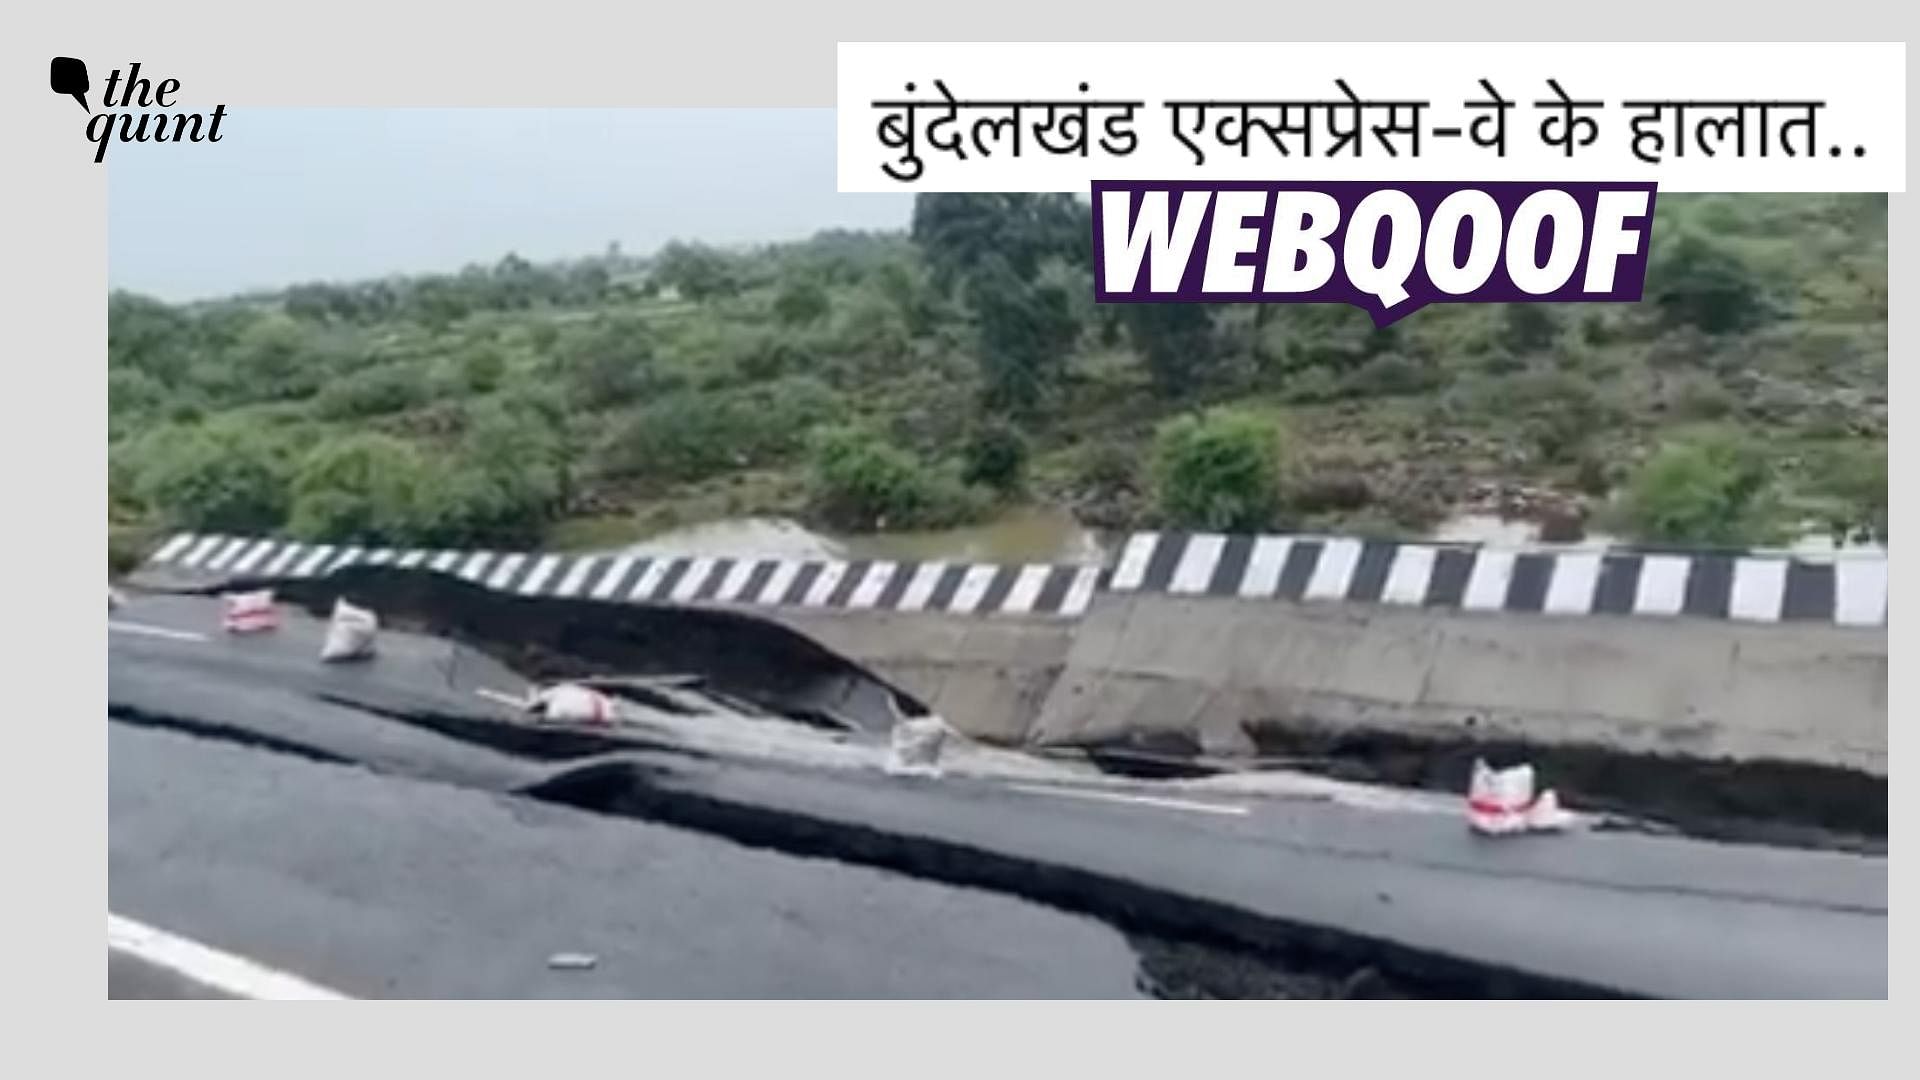 <div class="paragraphs"><p>The claims state that the video shows bridge collapse at Bundelkhand Expressway in Uttar Pradesh.&nbsp;</p></div>